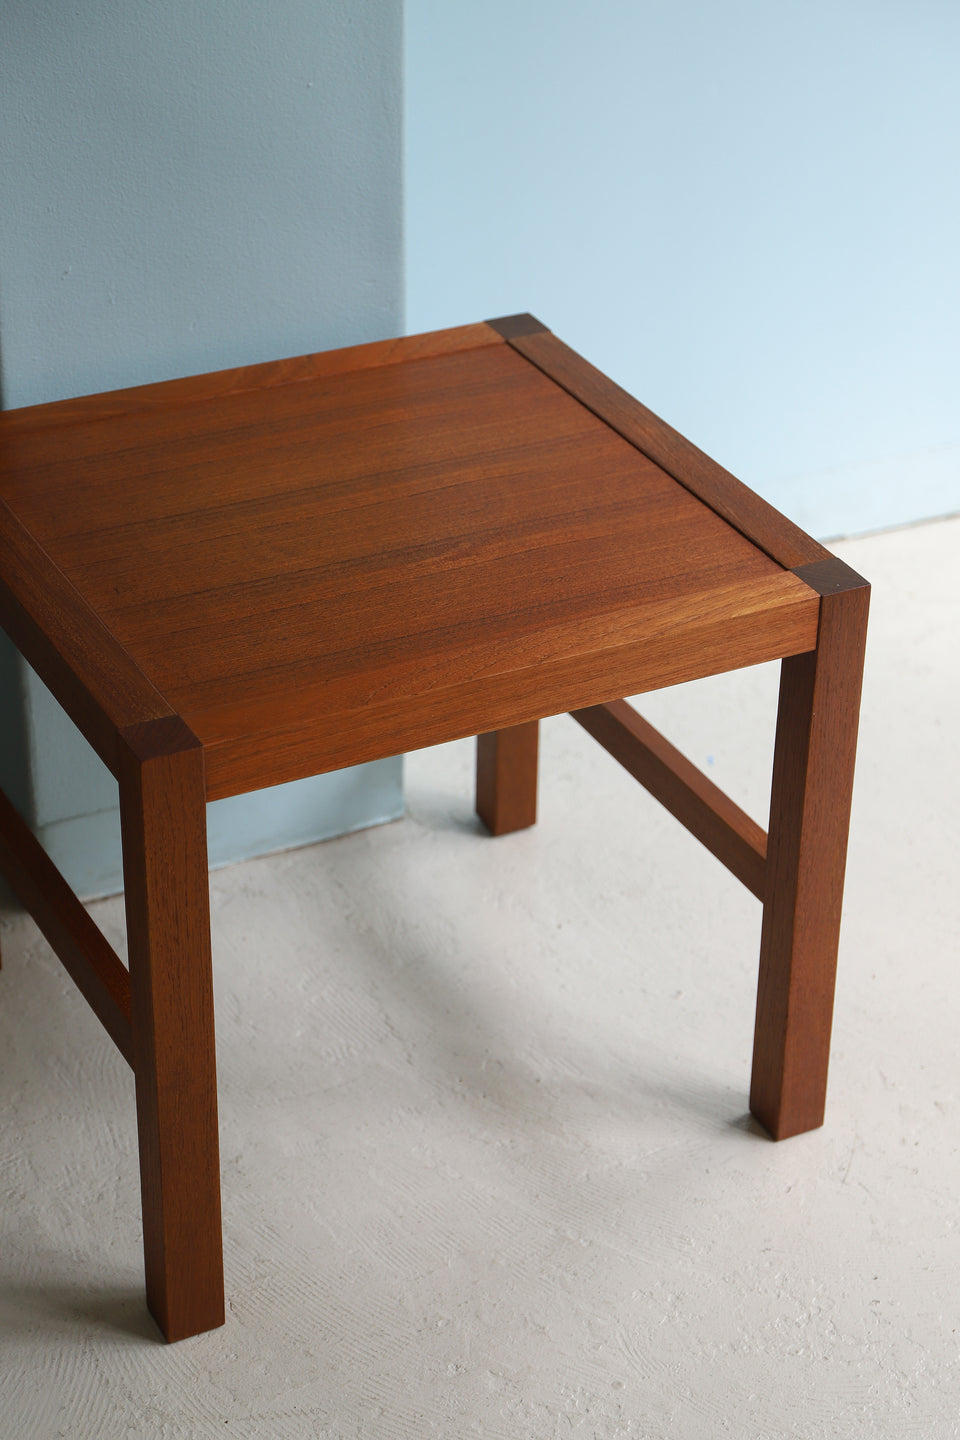 Japanese Vintage Side Table Teakwood/ジャパンヴィンテージ サイドテーブル チーク材 北欧スタイル